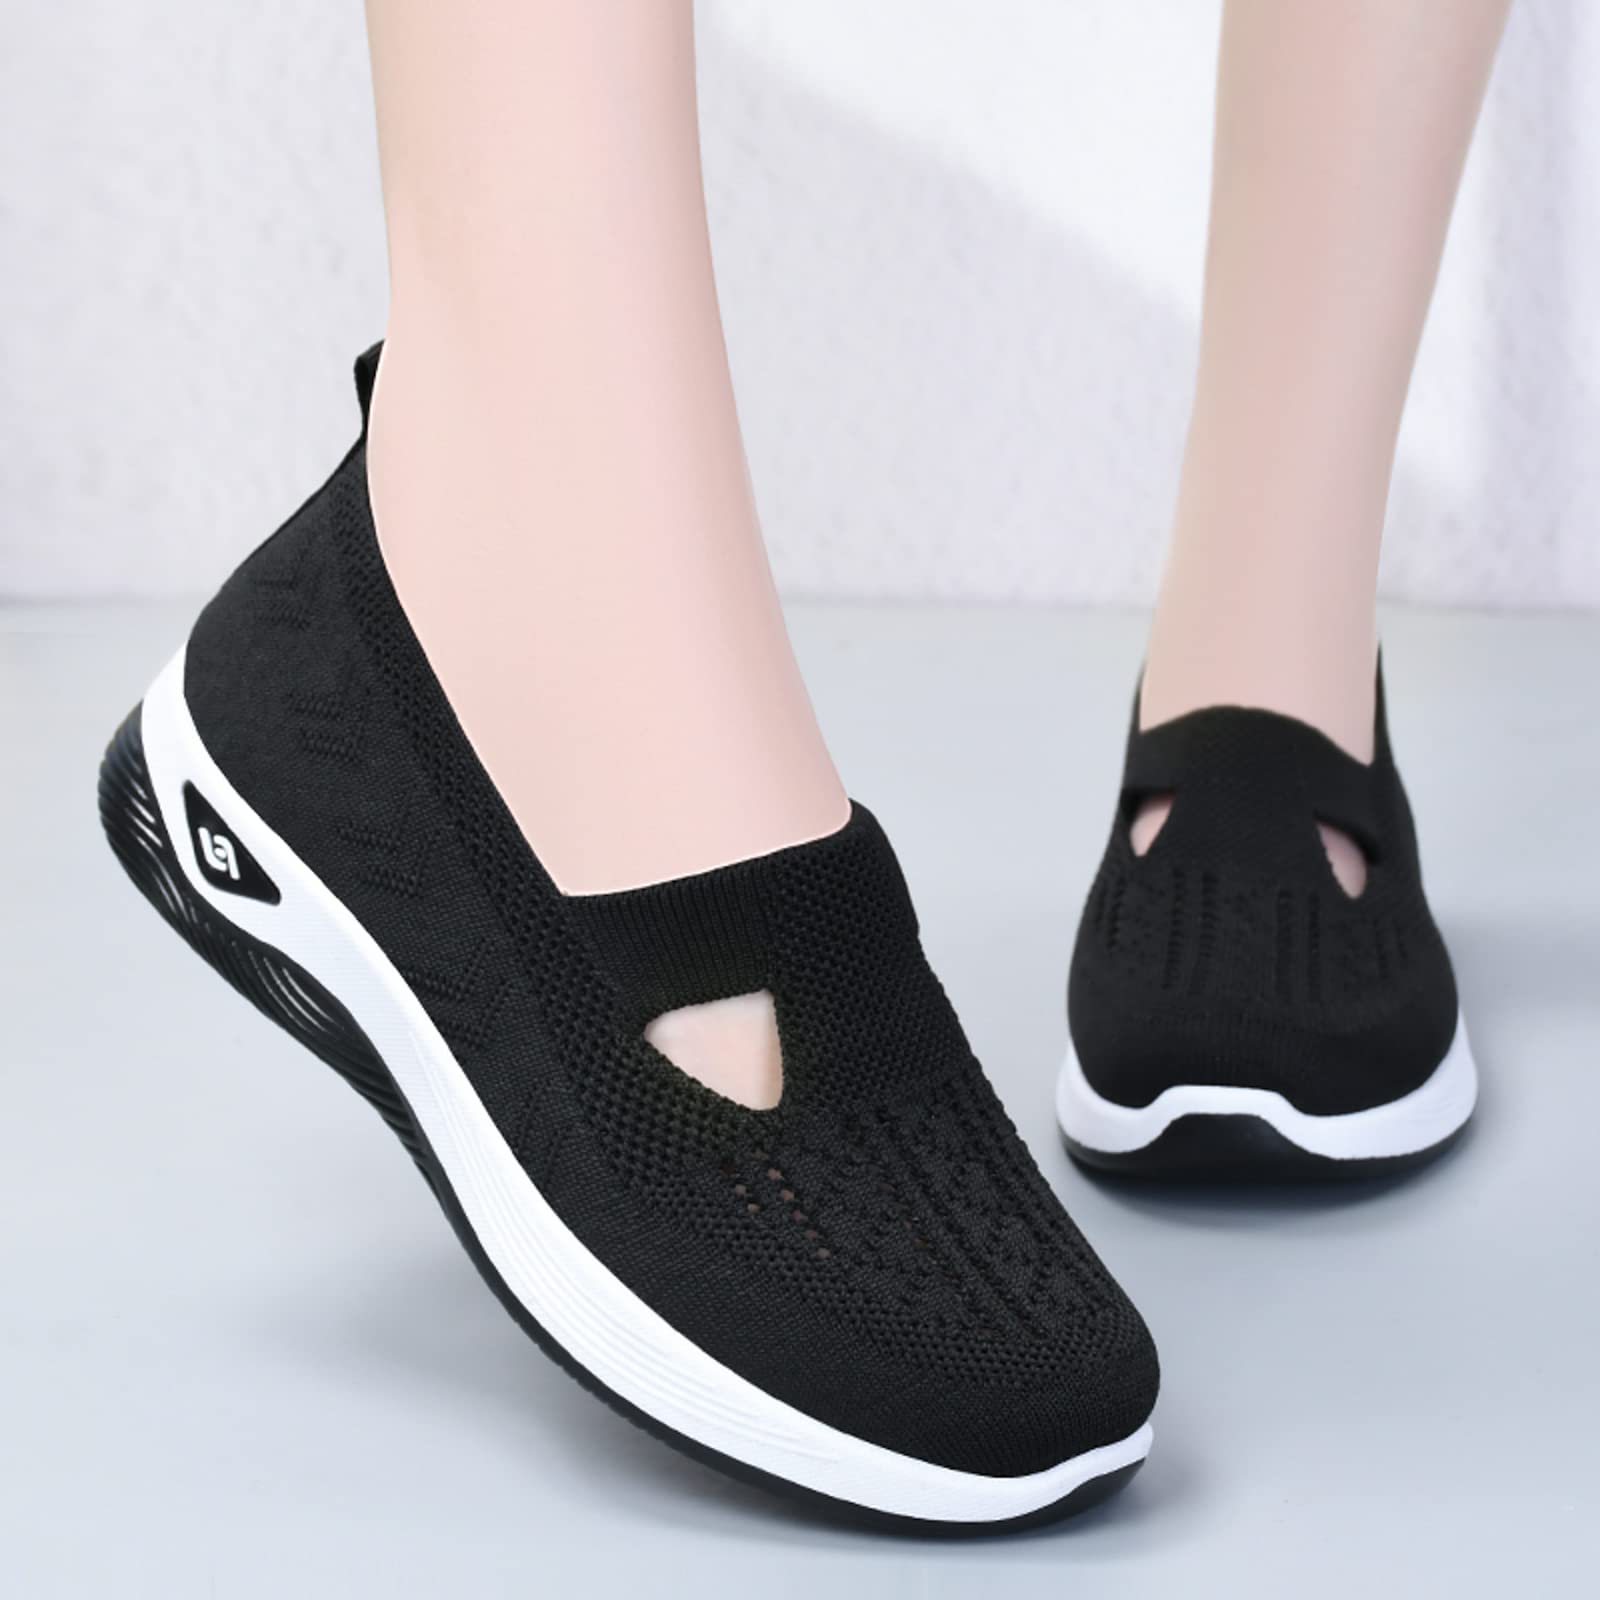 Shoes for Women Durable Anti Slip Sneakers Mesh Breathable Round Toe Sports Shoes Dressy Wide Fitting Sneakers Loafers Ladies Lightweight Soft Sole Trail Running Jogging Shoes Black